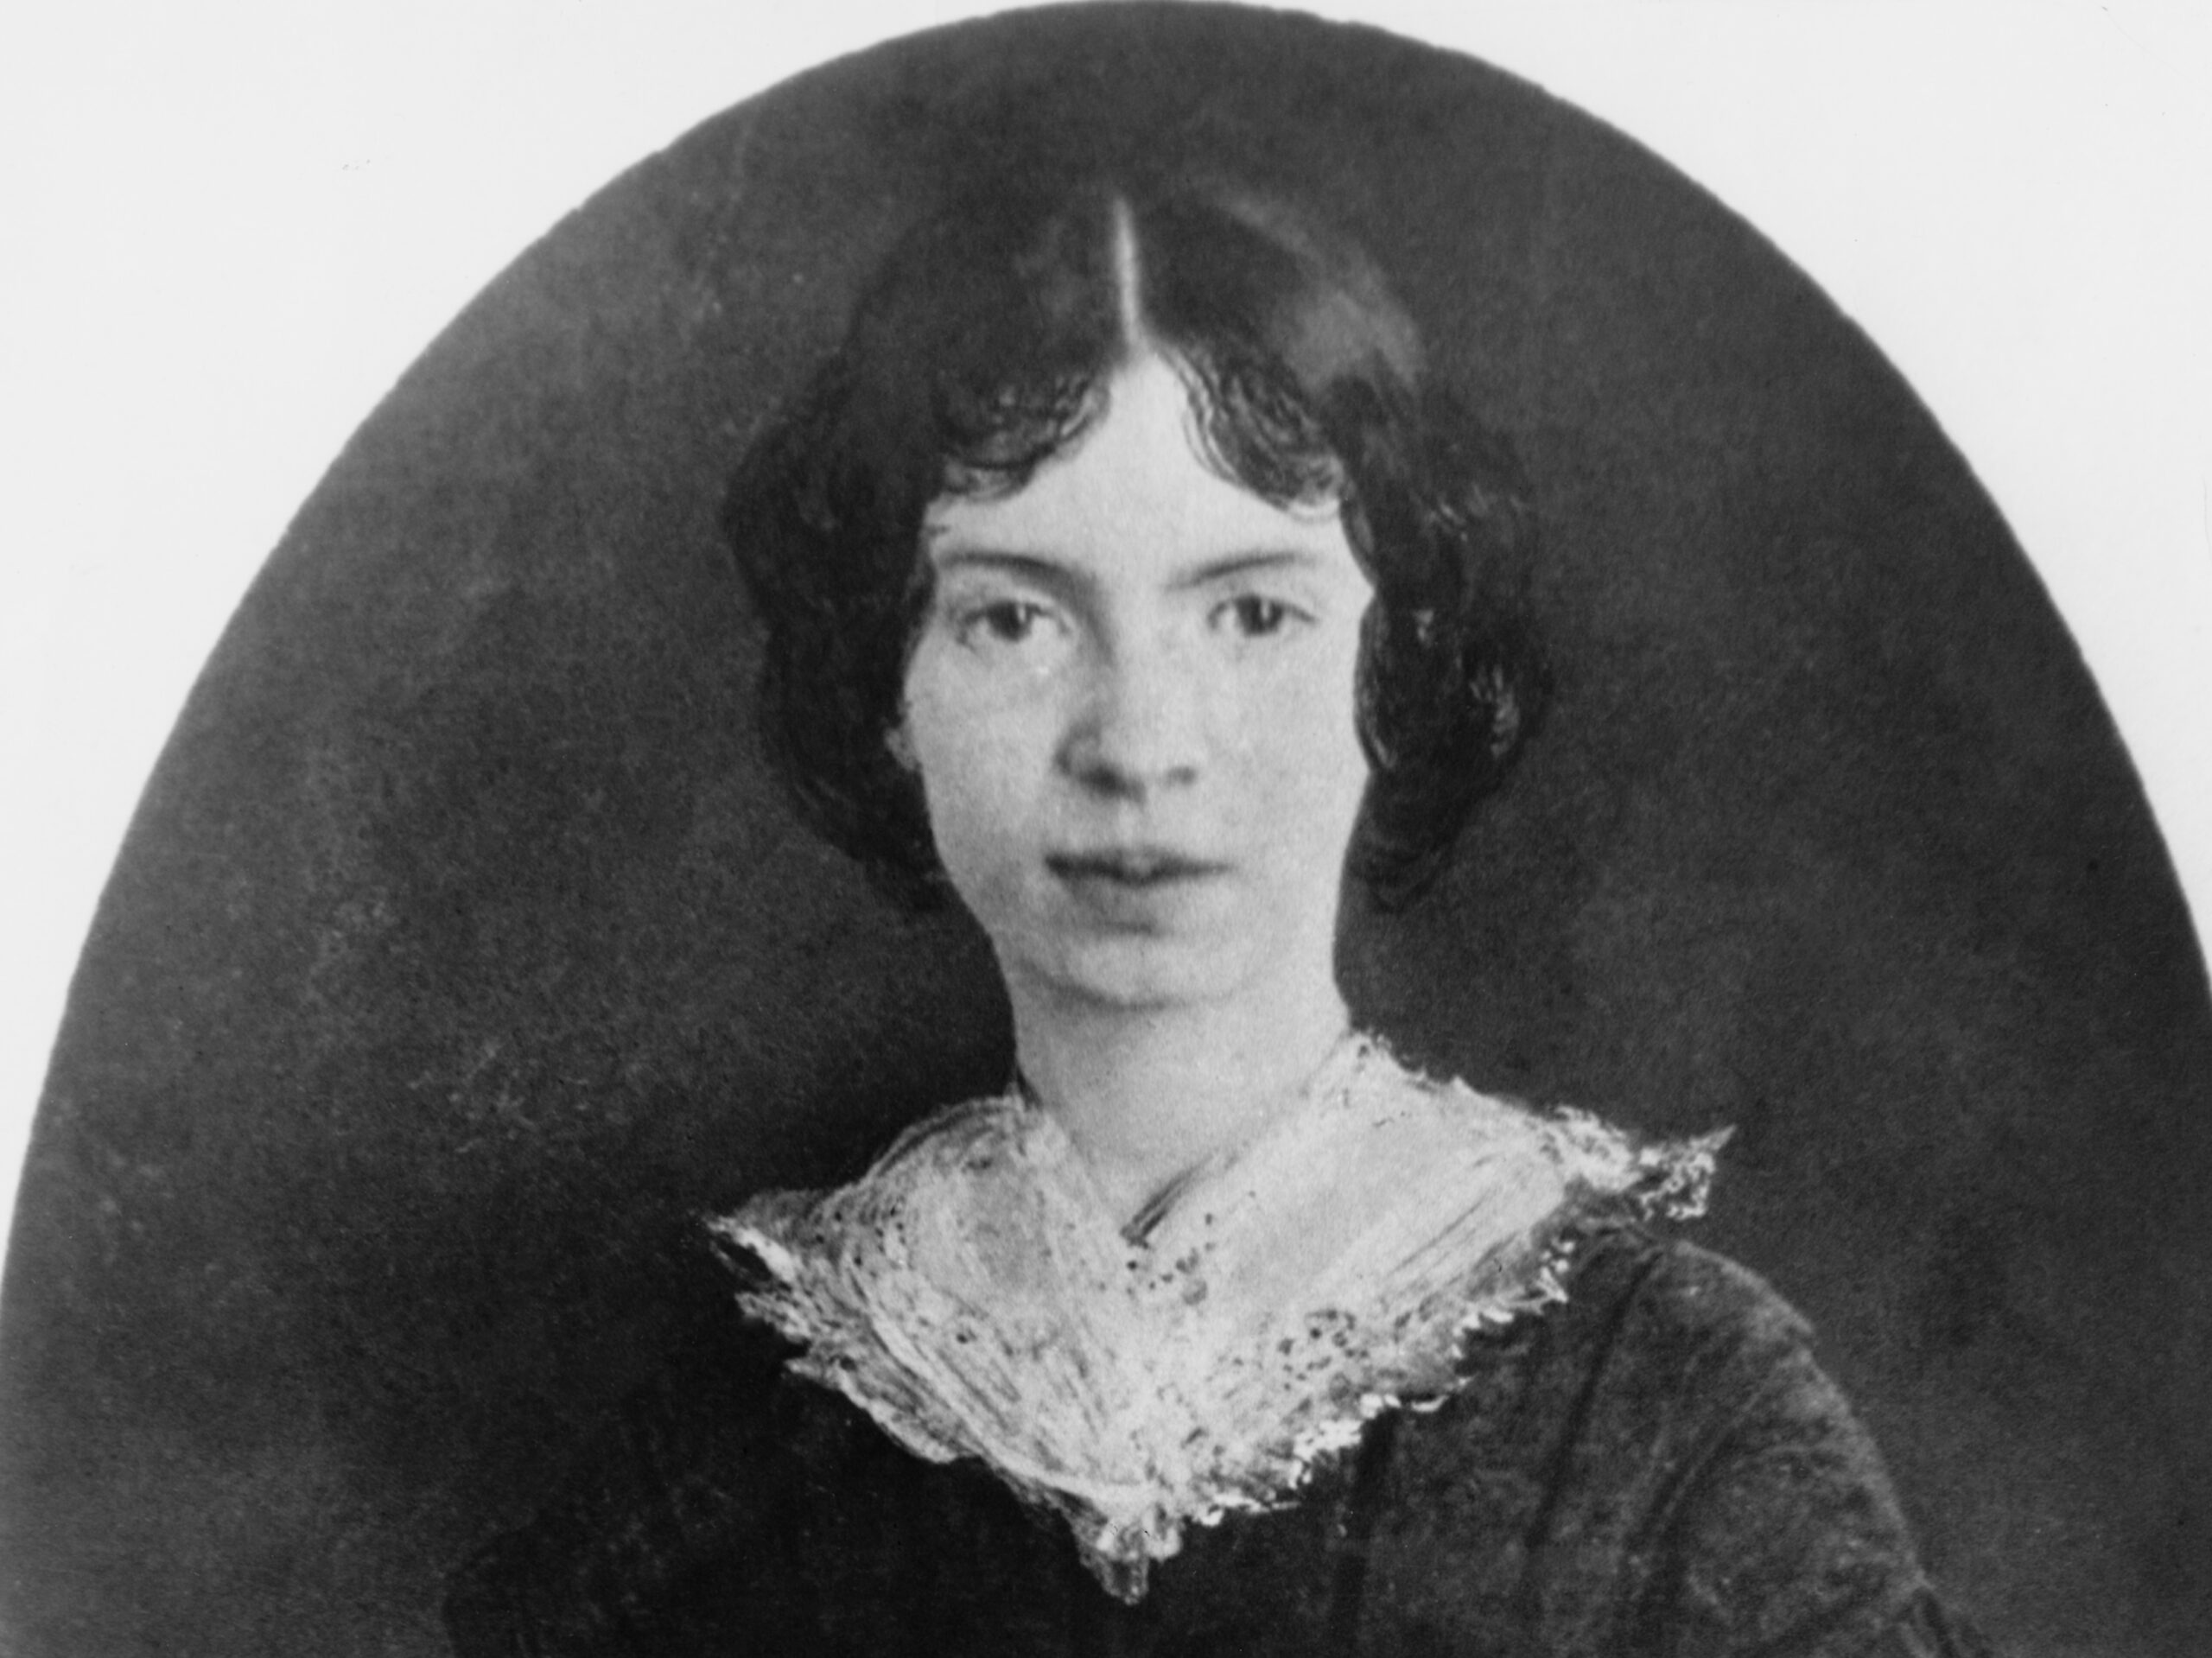 A new collection of Emily Dickinson's letters has been published by Harvard's Belknap Press, edited by Dickinson scholars Cristanne Miller and Domhnall Mitchell.